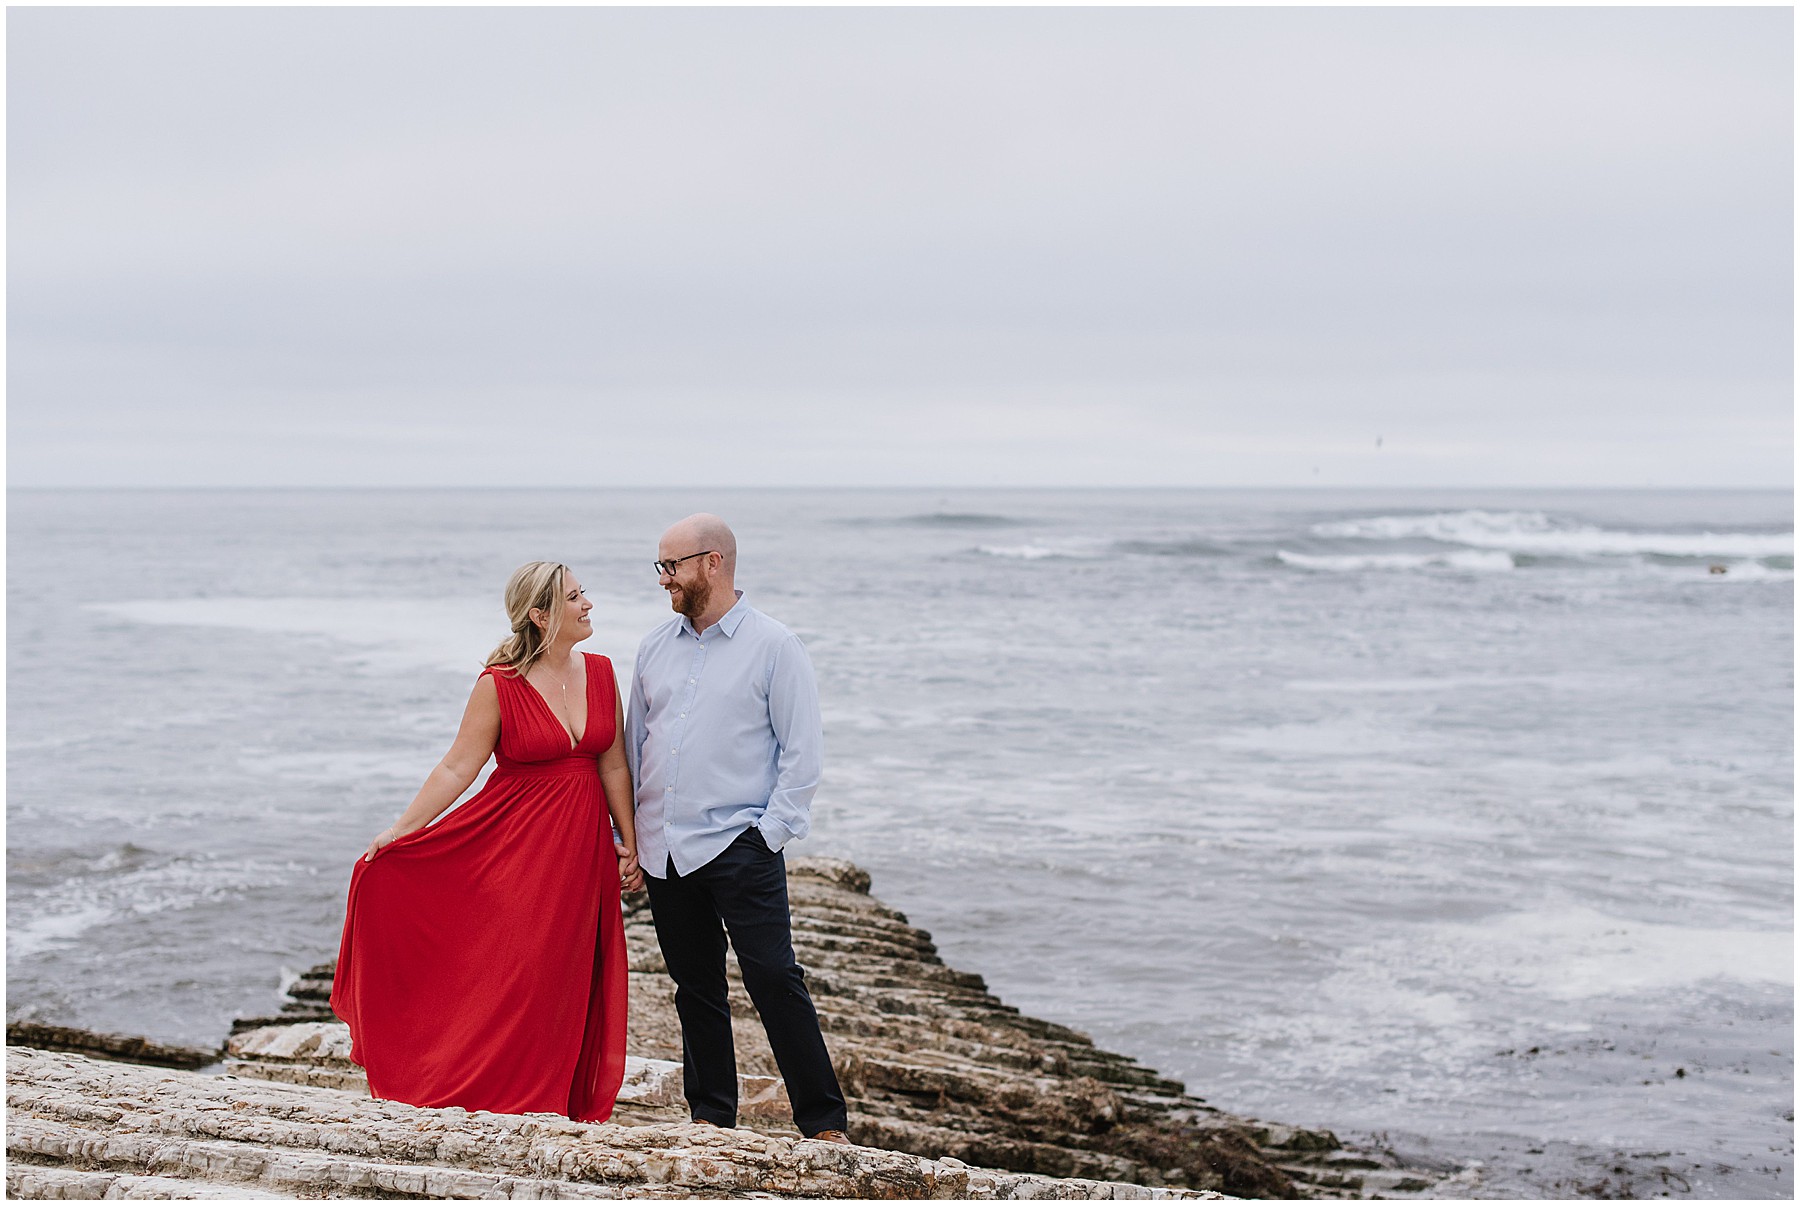 Montana De Oro Los Osos California Engagement Session with Red Dress